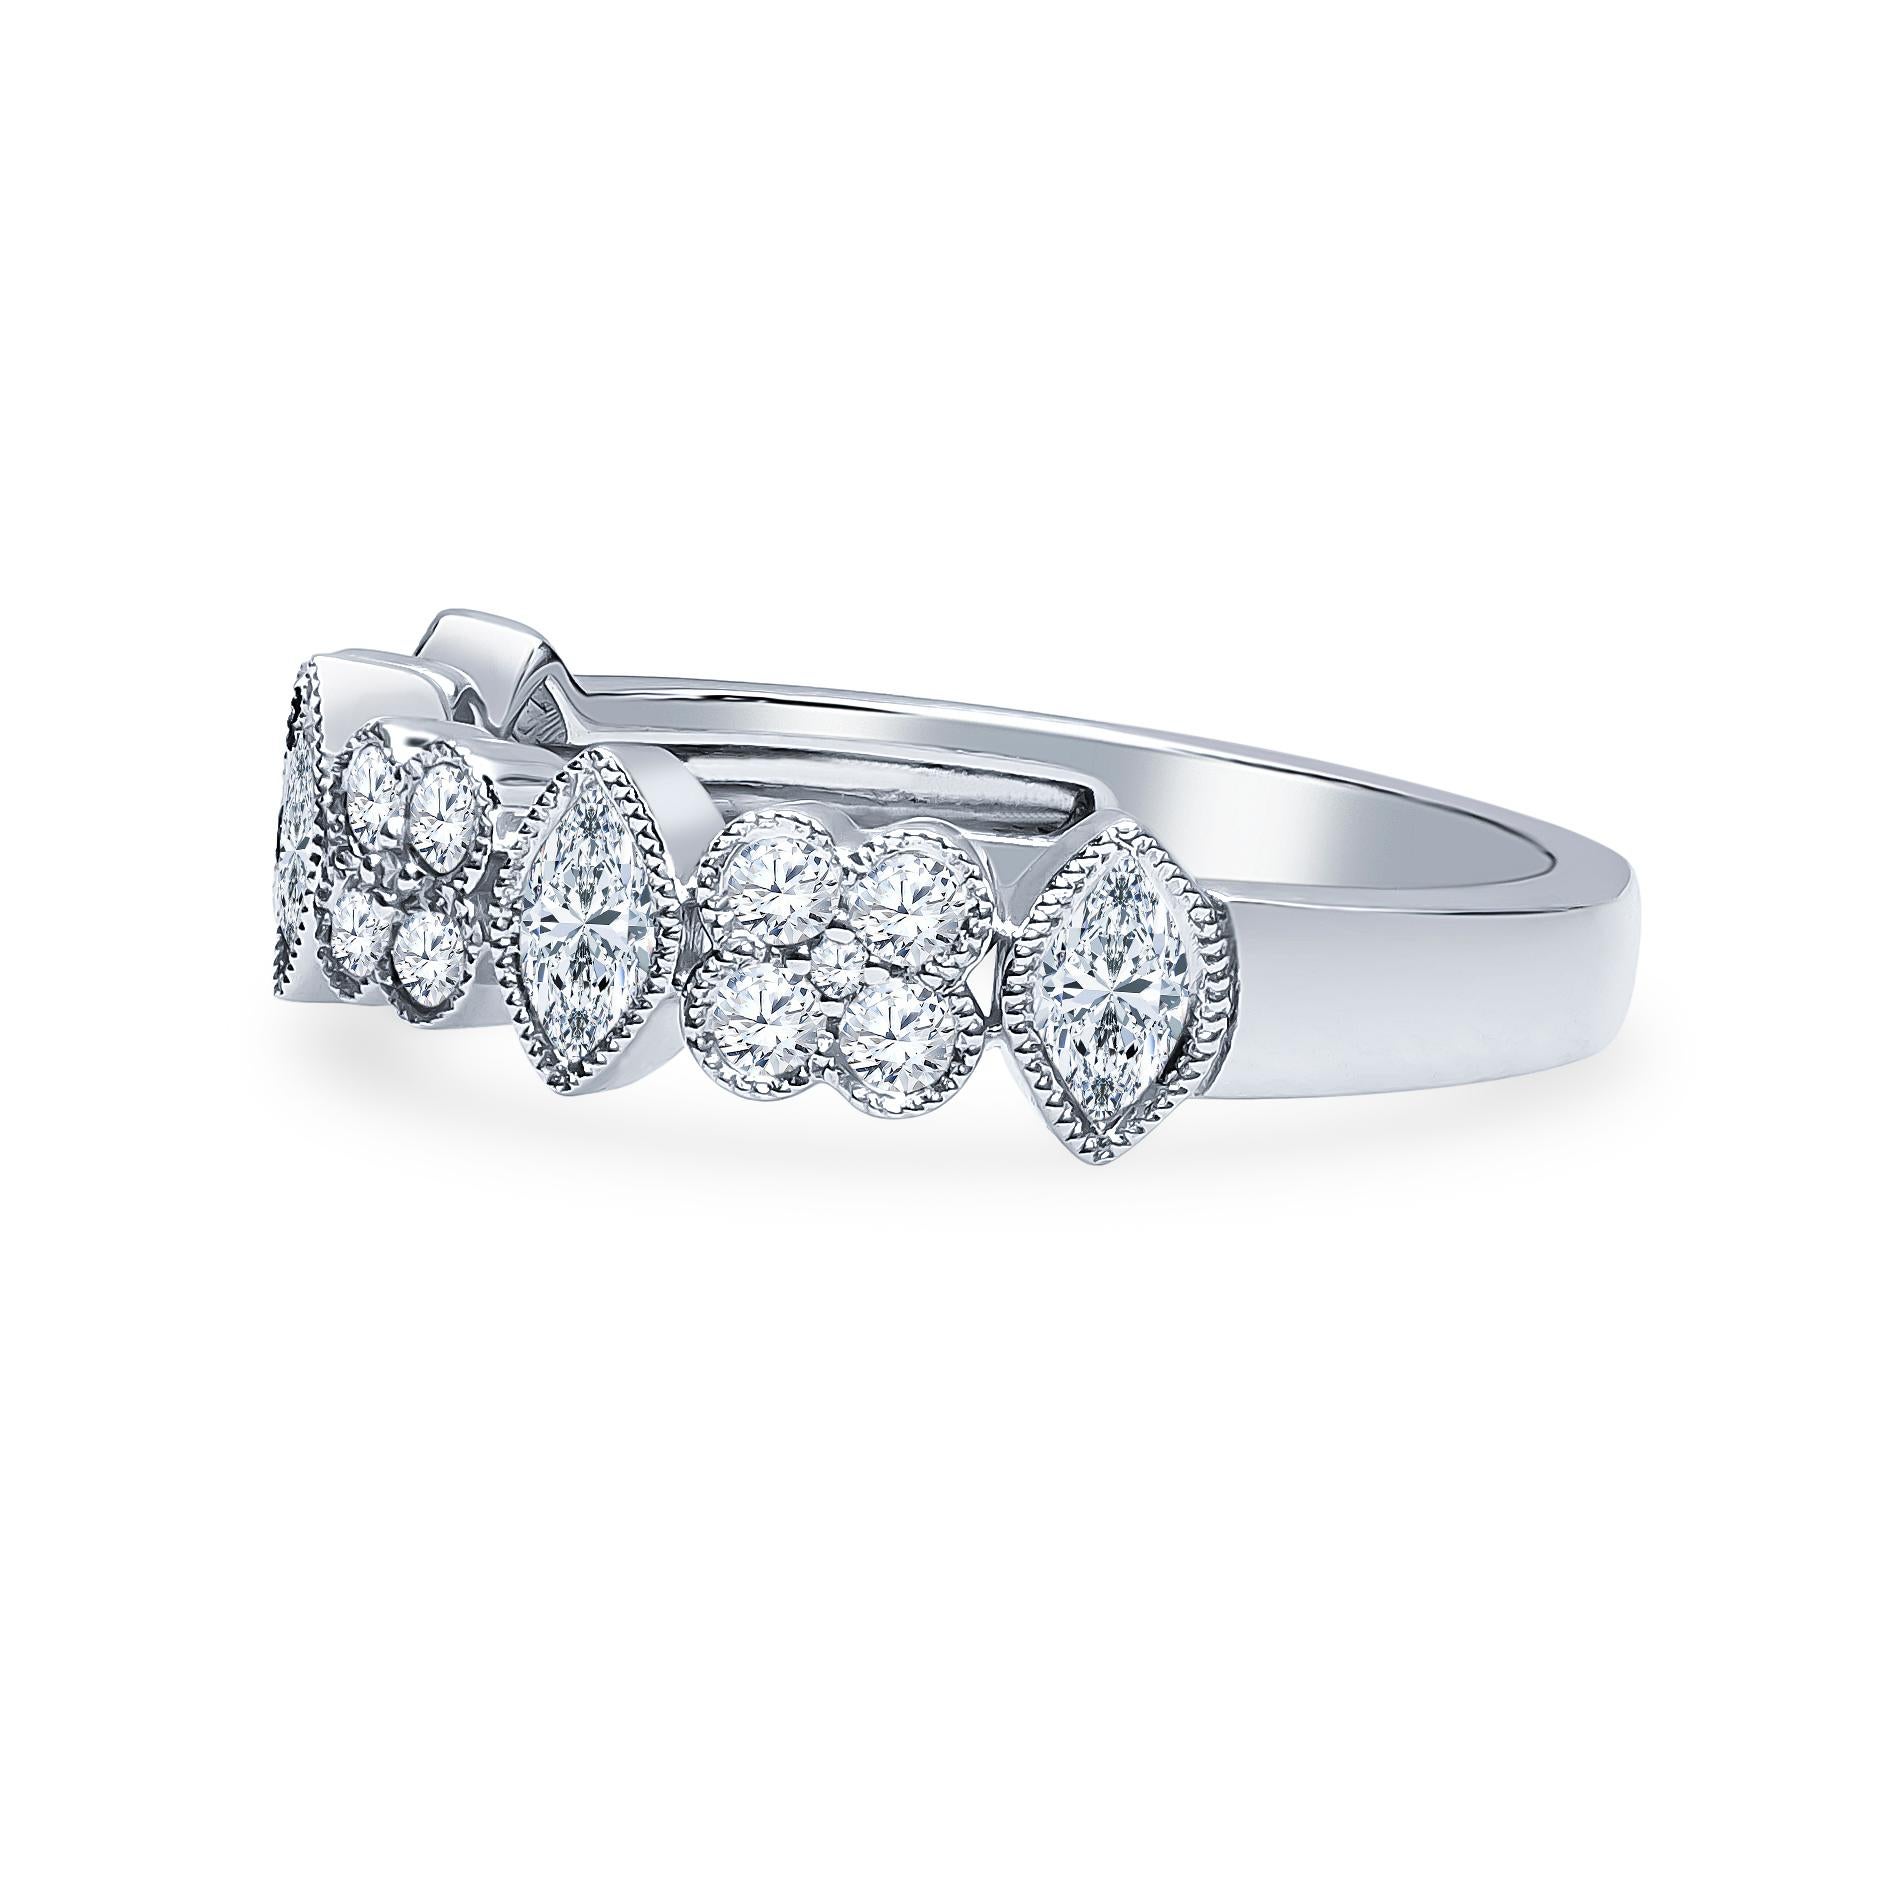 Beautiful women's band with a combination of 0.37 carats of marquise shape diamonds and 0.30 carats total of round brilliant cut diamonds milgrain and bezel set in 18K white gold. Size 6.5, may be resized to larger or smaller upon request.